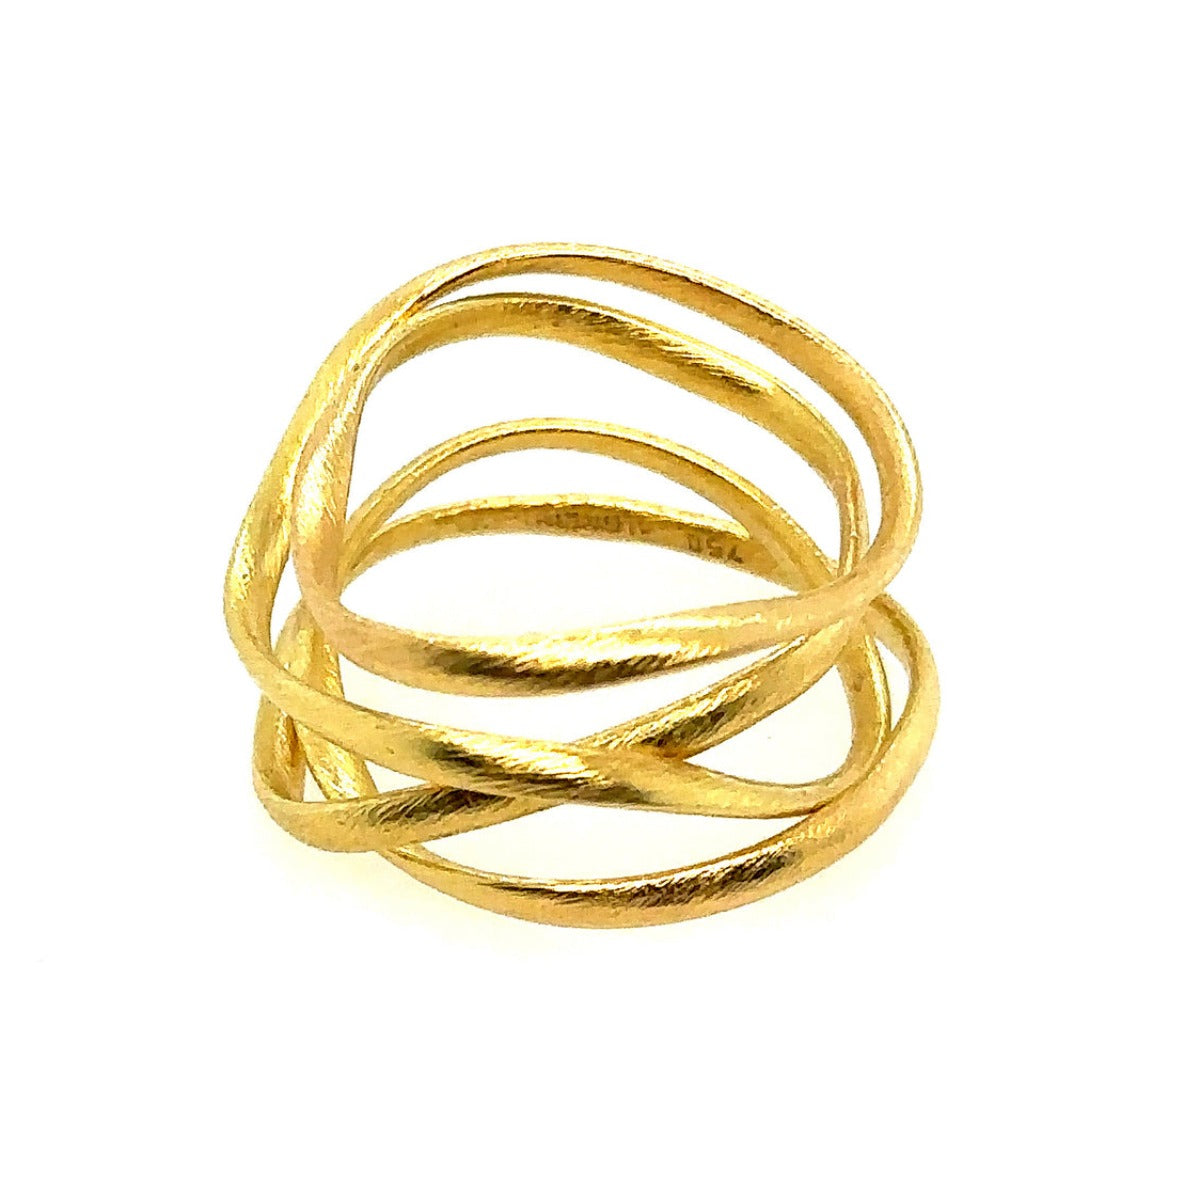 Flair ring no.4 in 18kt. gold with 4 windings